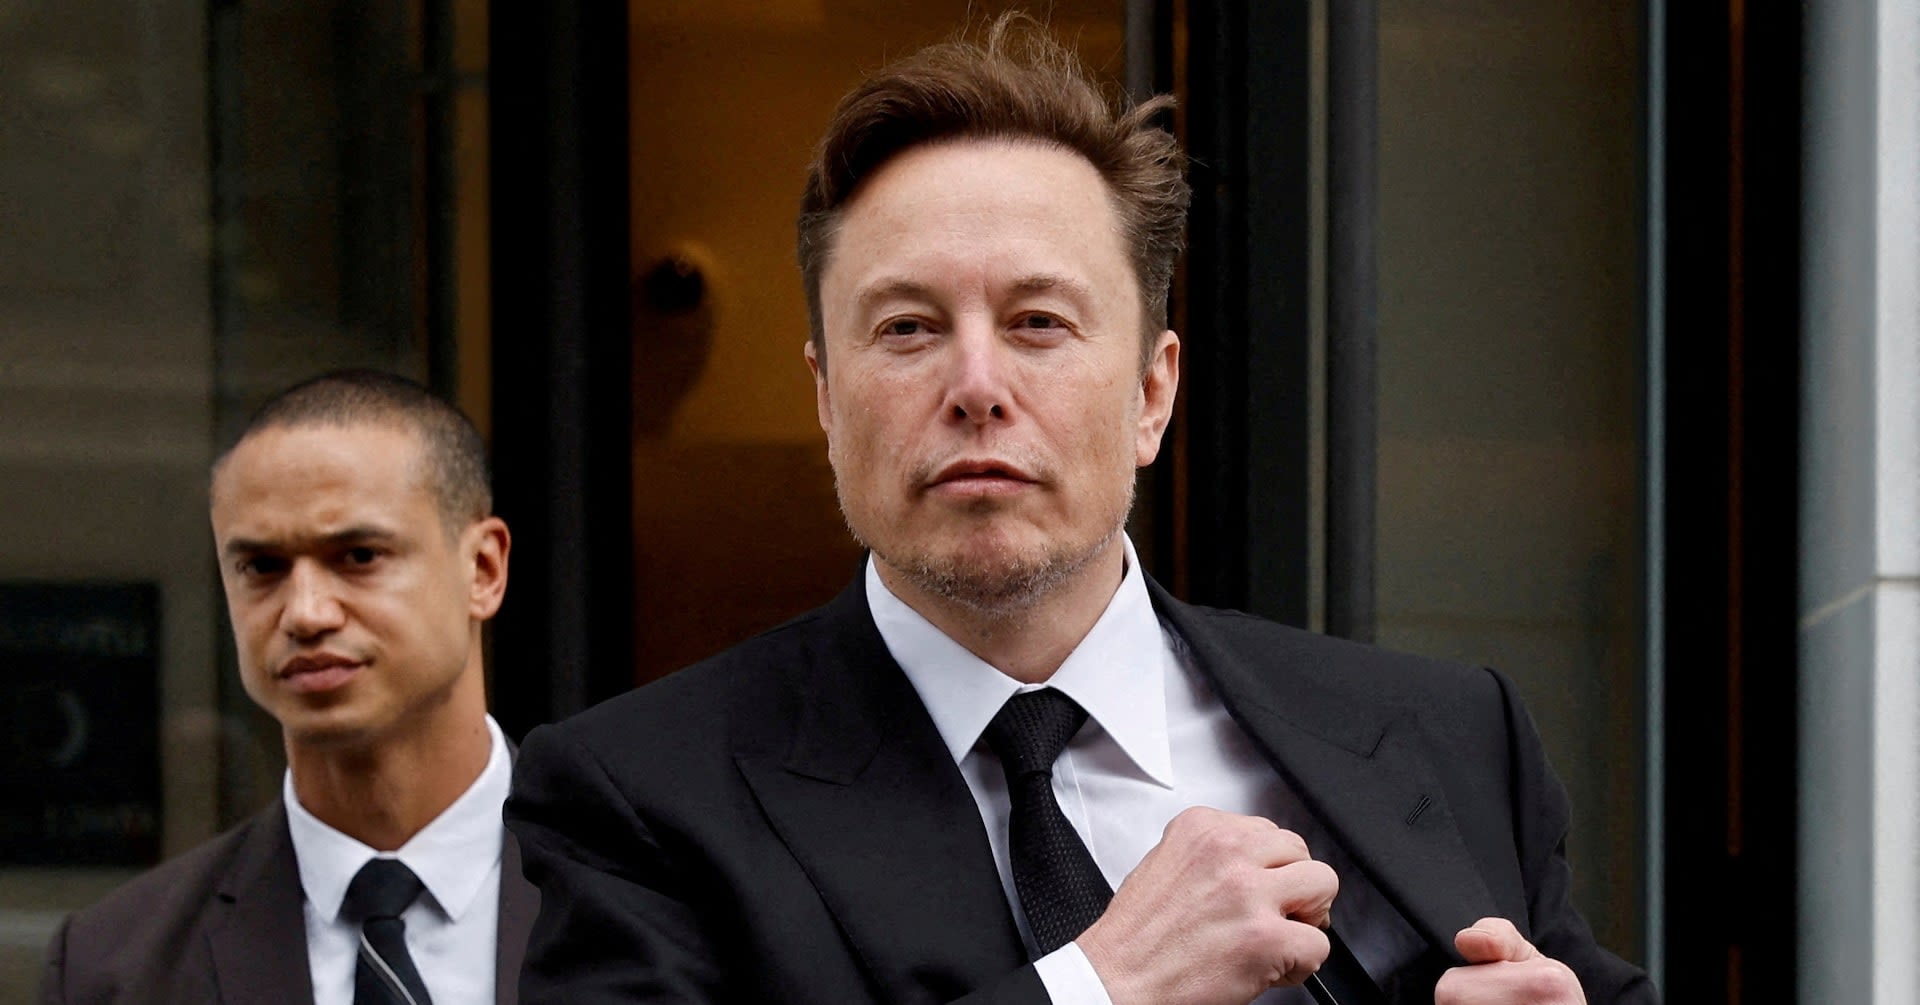 Musk's $56 bln pay package opposed by CalPERS CEO, CNBC reports